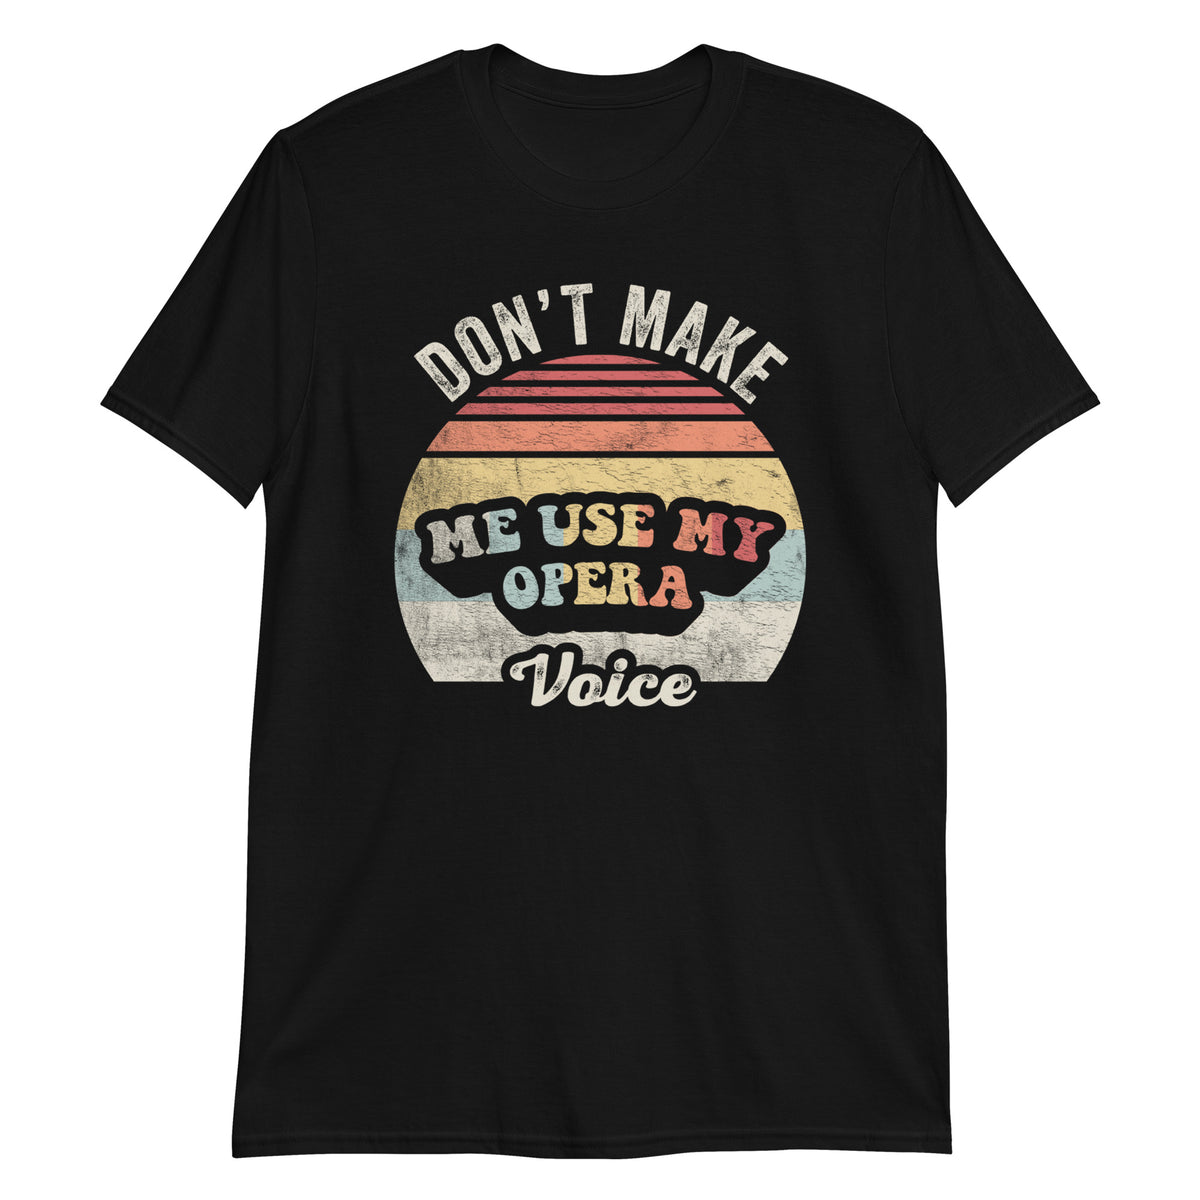 Don't Make Me Use My Opera Voice Funny Vintage Distressed T-Shirt